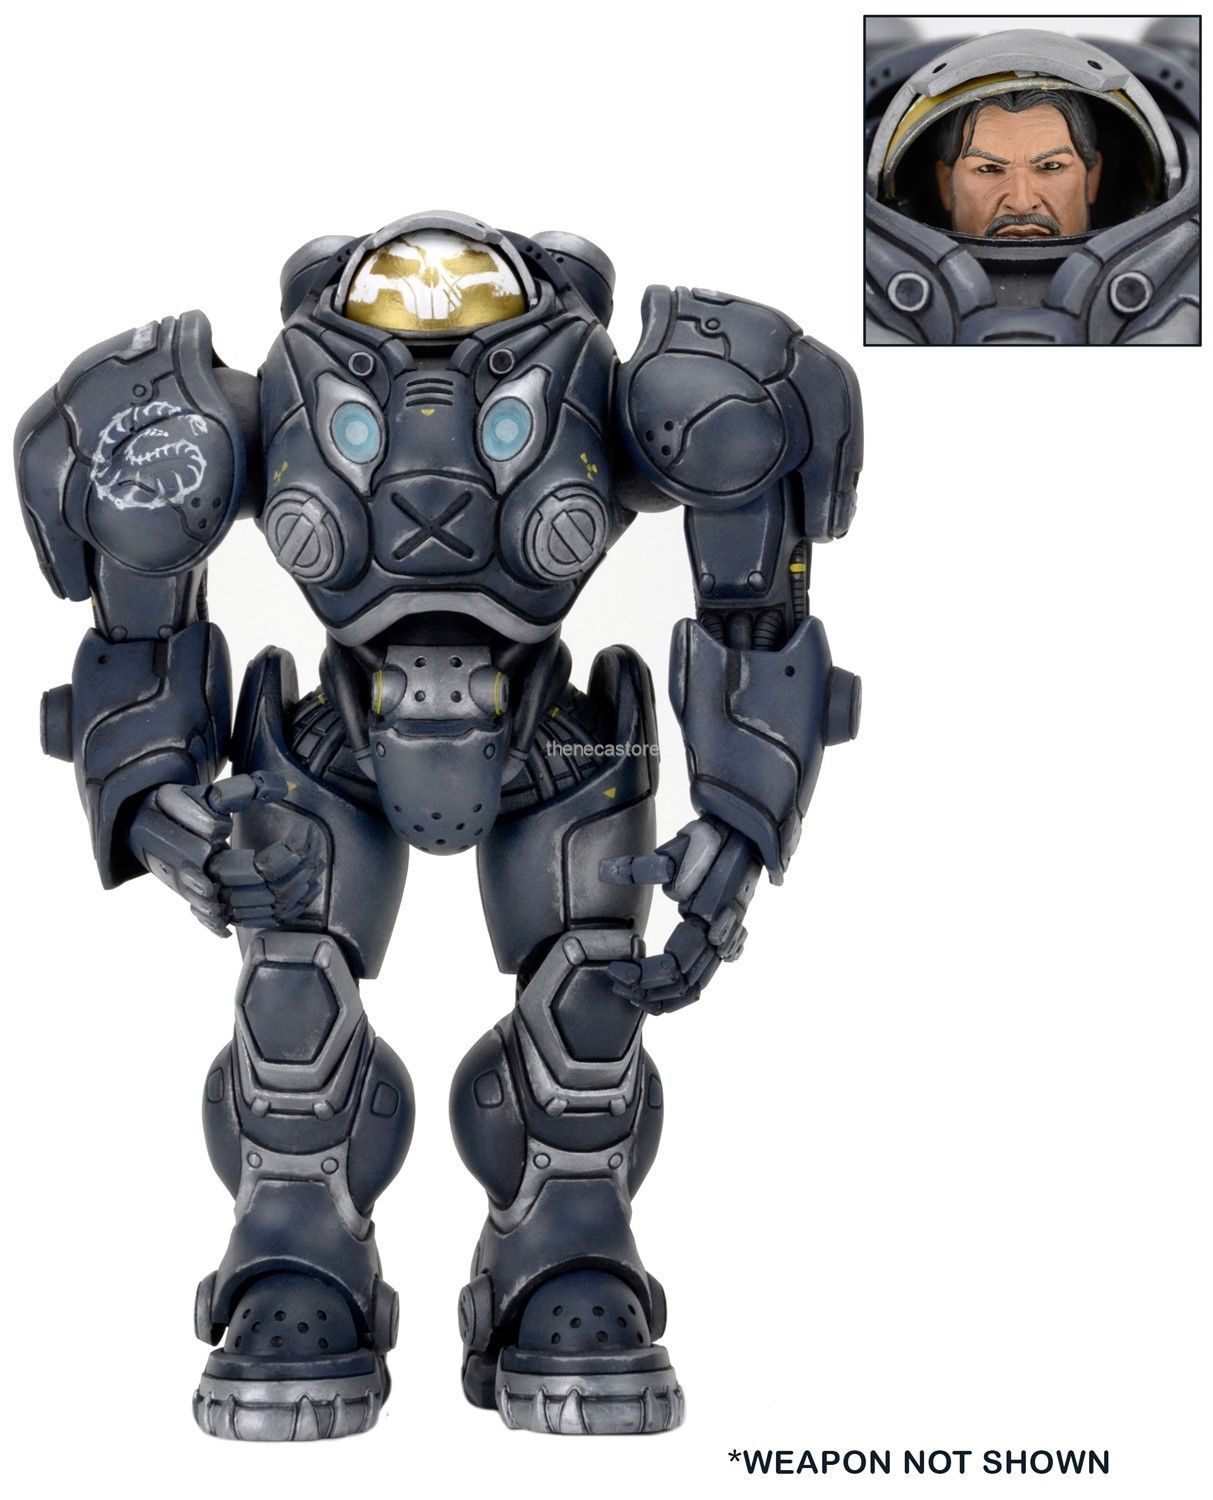 Heroes of the Storm - 7" Scale Action Figure - Series 3 - Raynor - NECA Blizzard